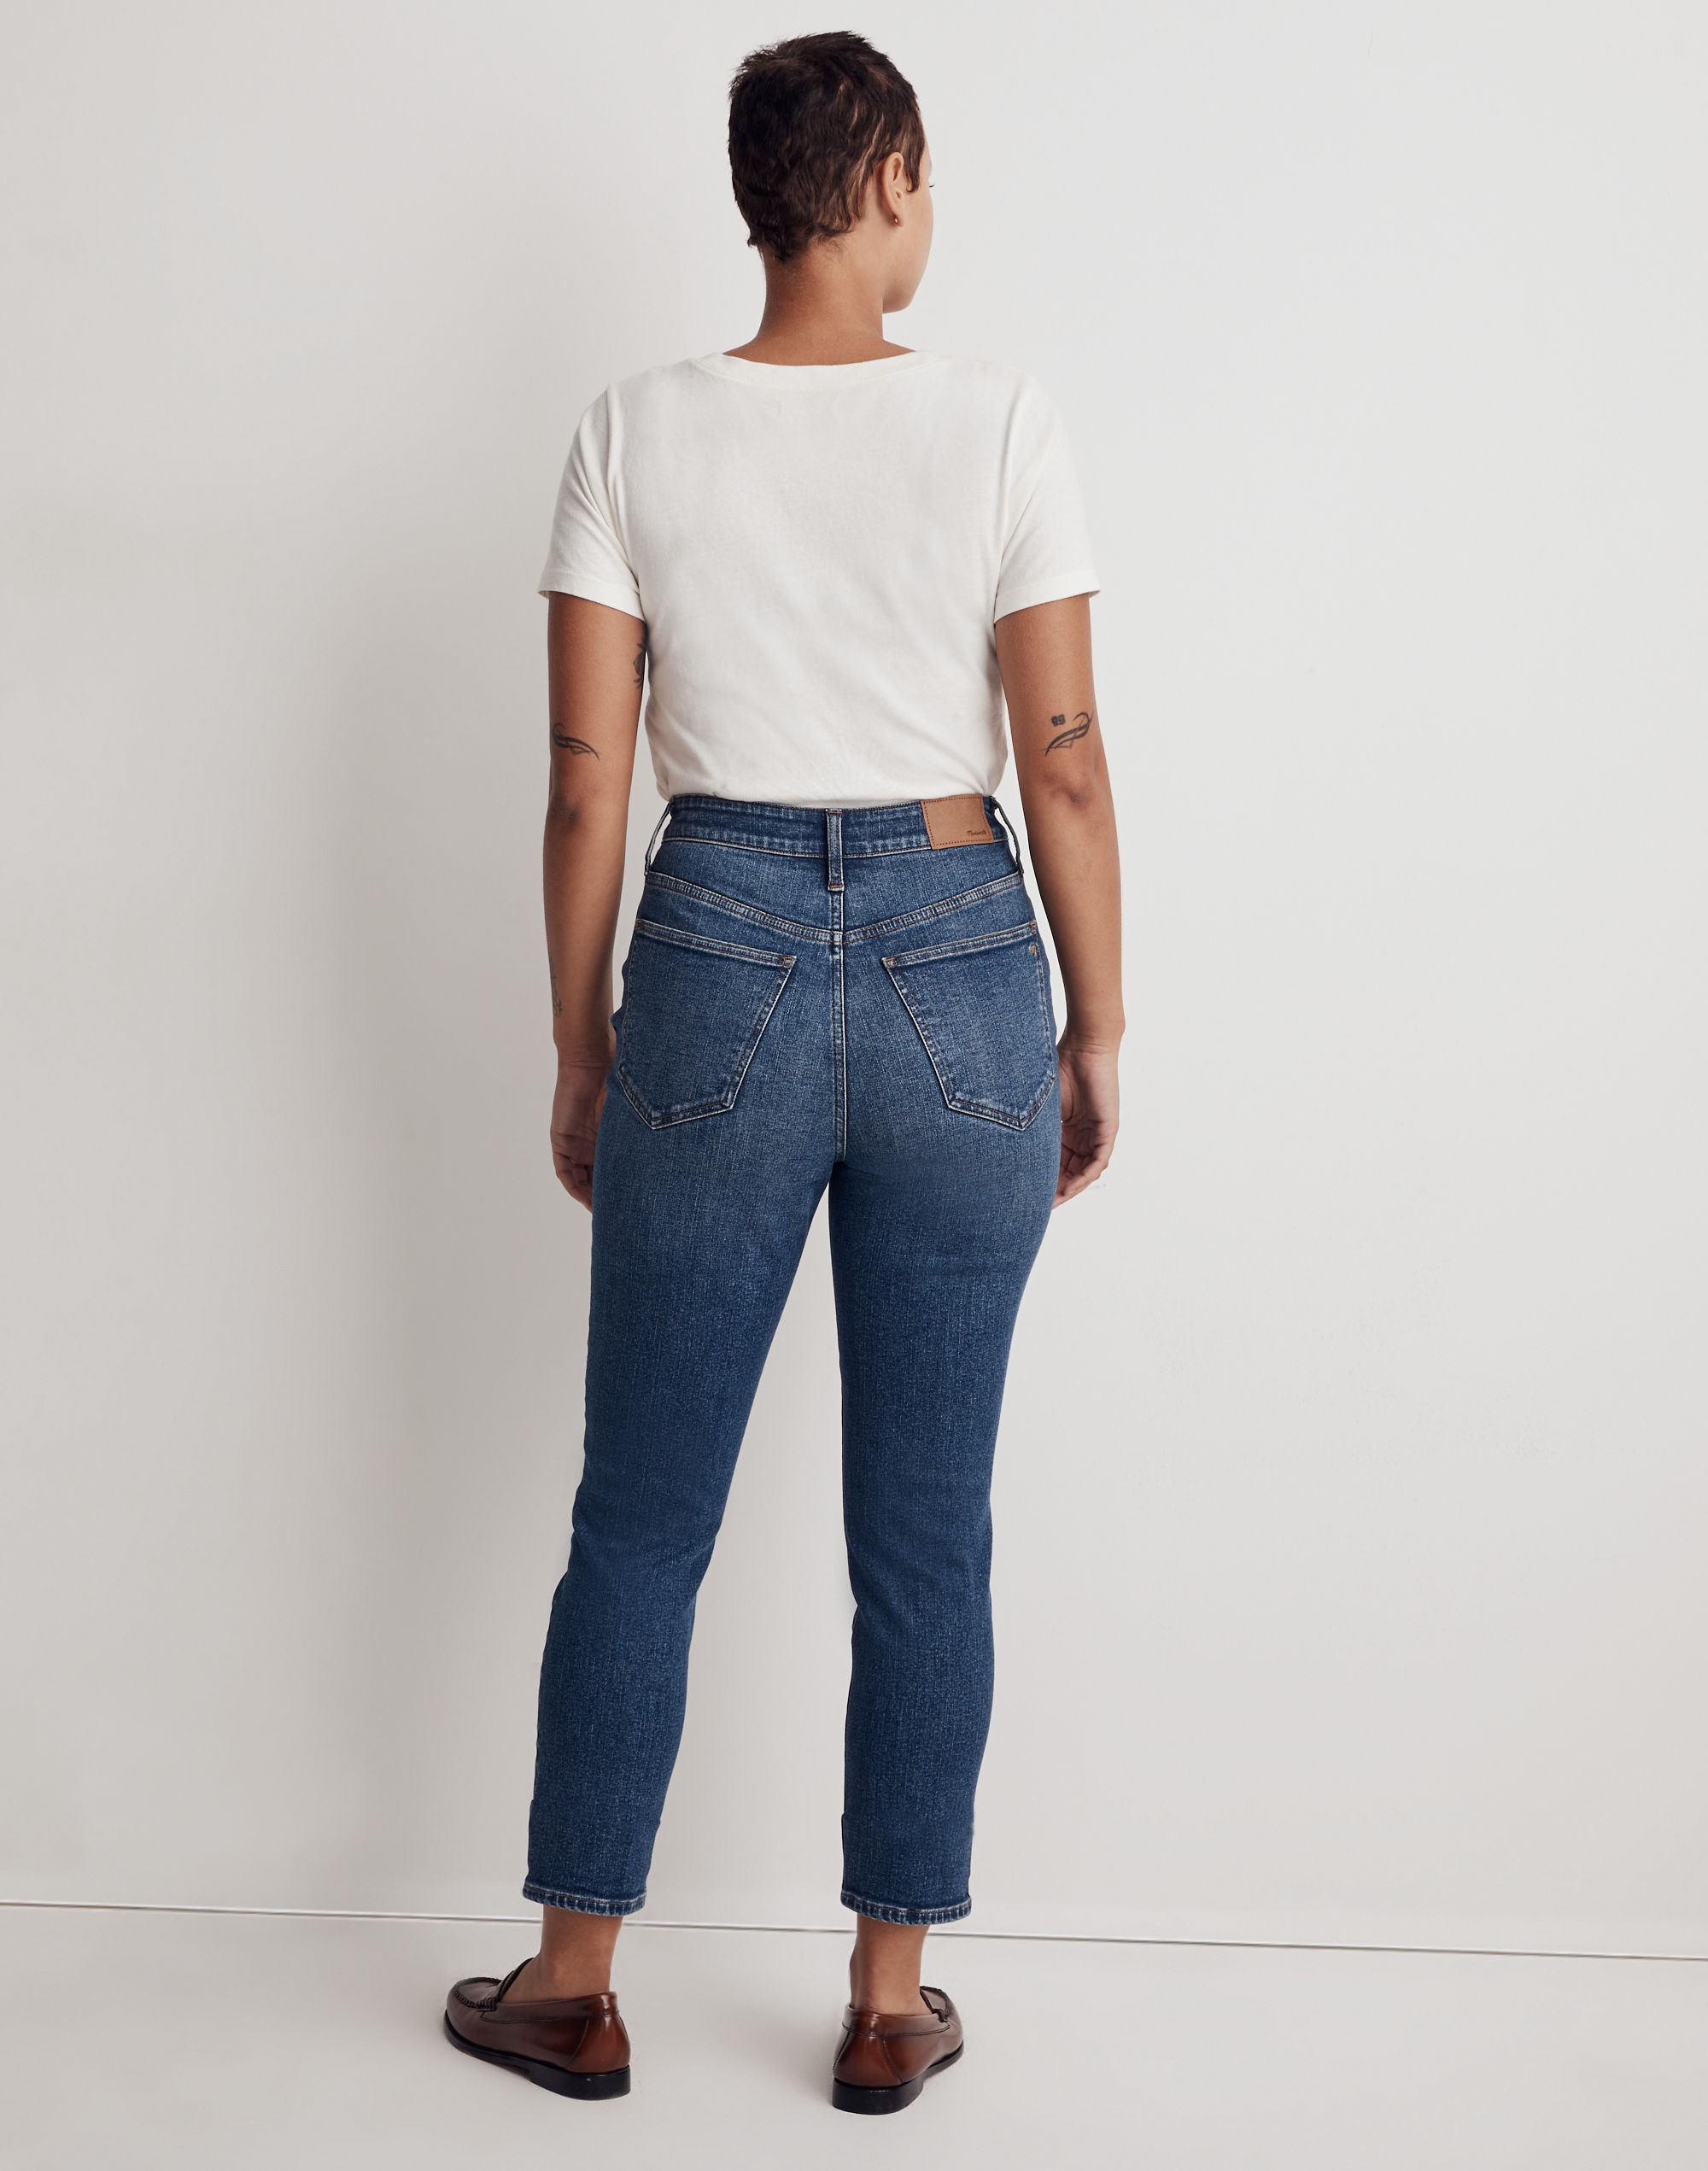 The Curvy Perfect Vintage Jean in Manorford Wash: Instacozy Edition